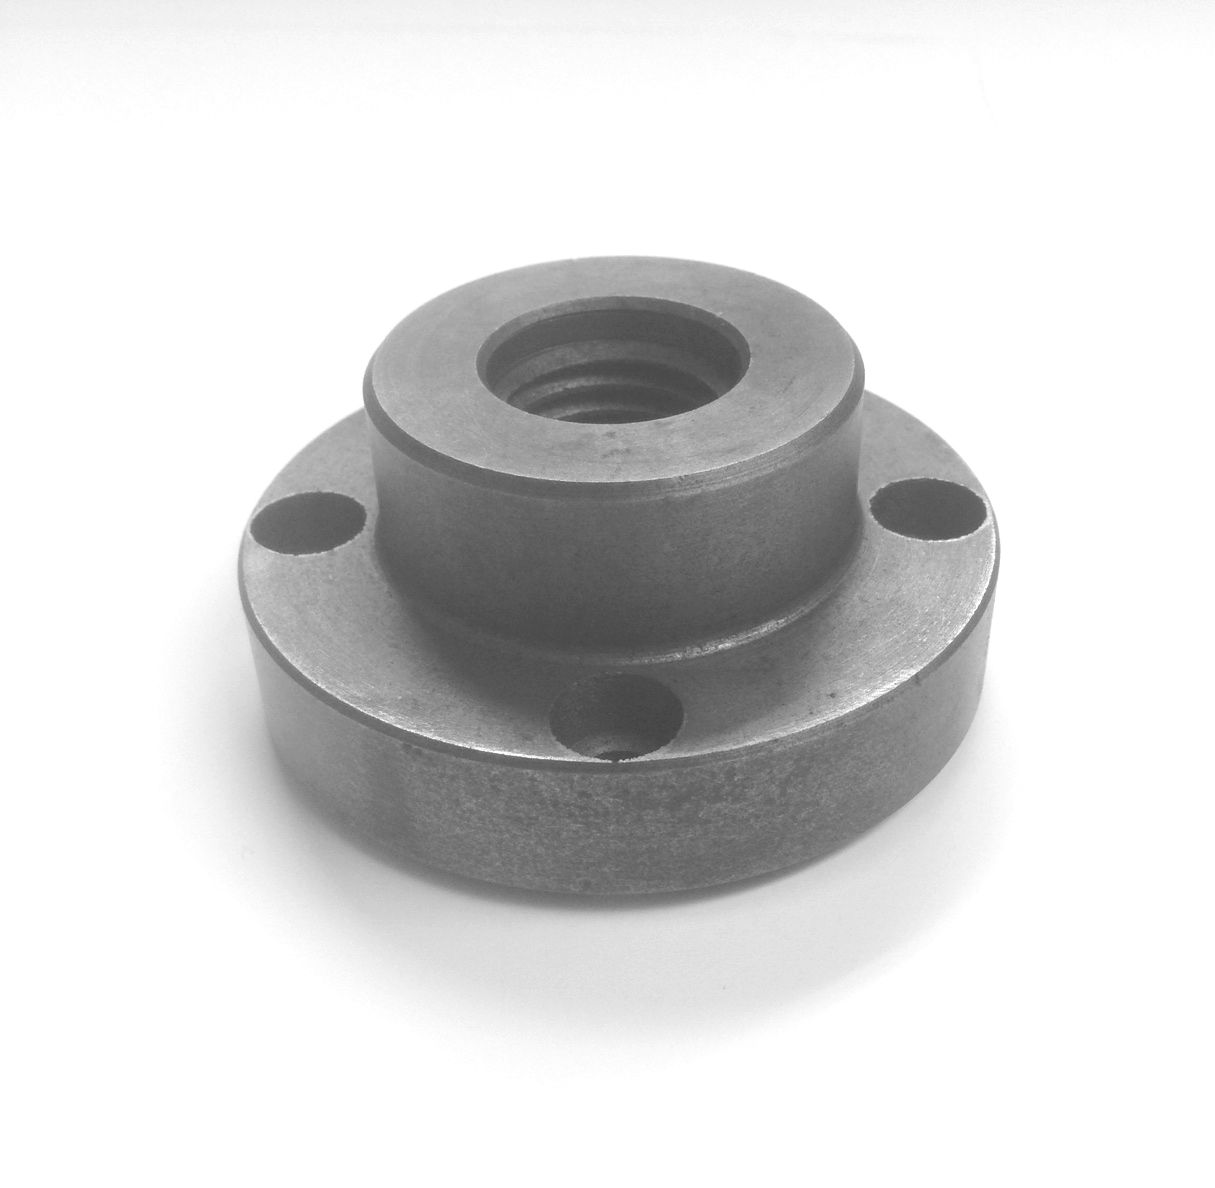 1/2-20 BACKPLATE FOR 3" 4 JAW CHUCK (3900-4129)